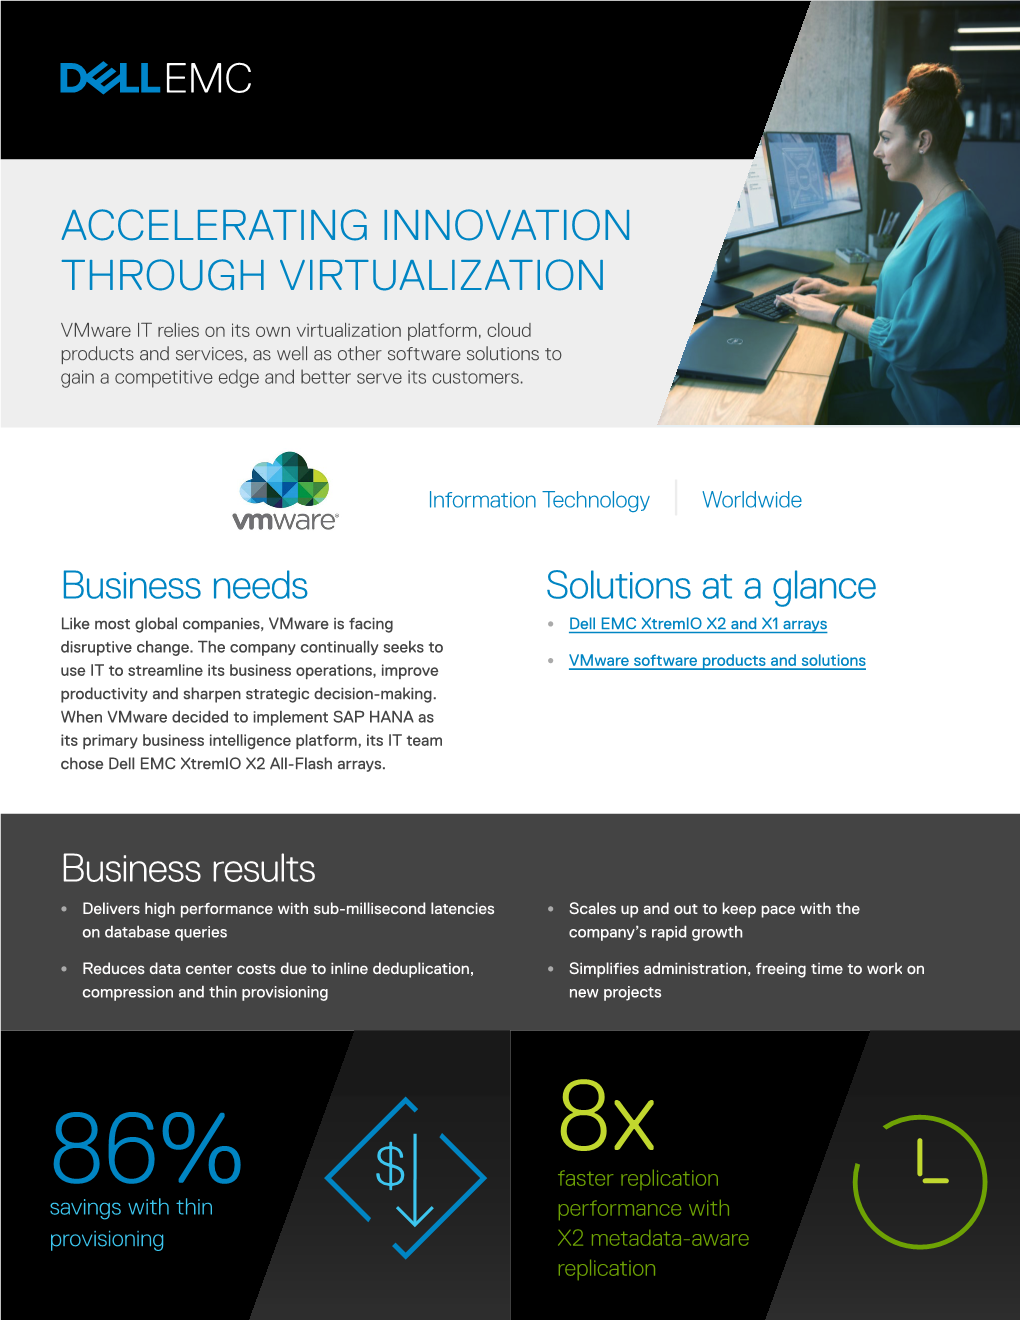 Vmware Chooses Xtremio X2 for the Highest Performance and Data